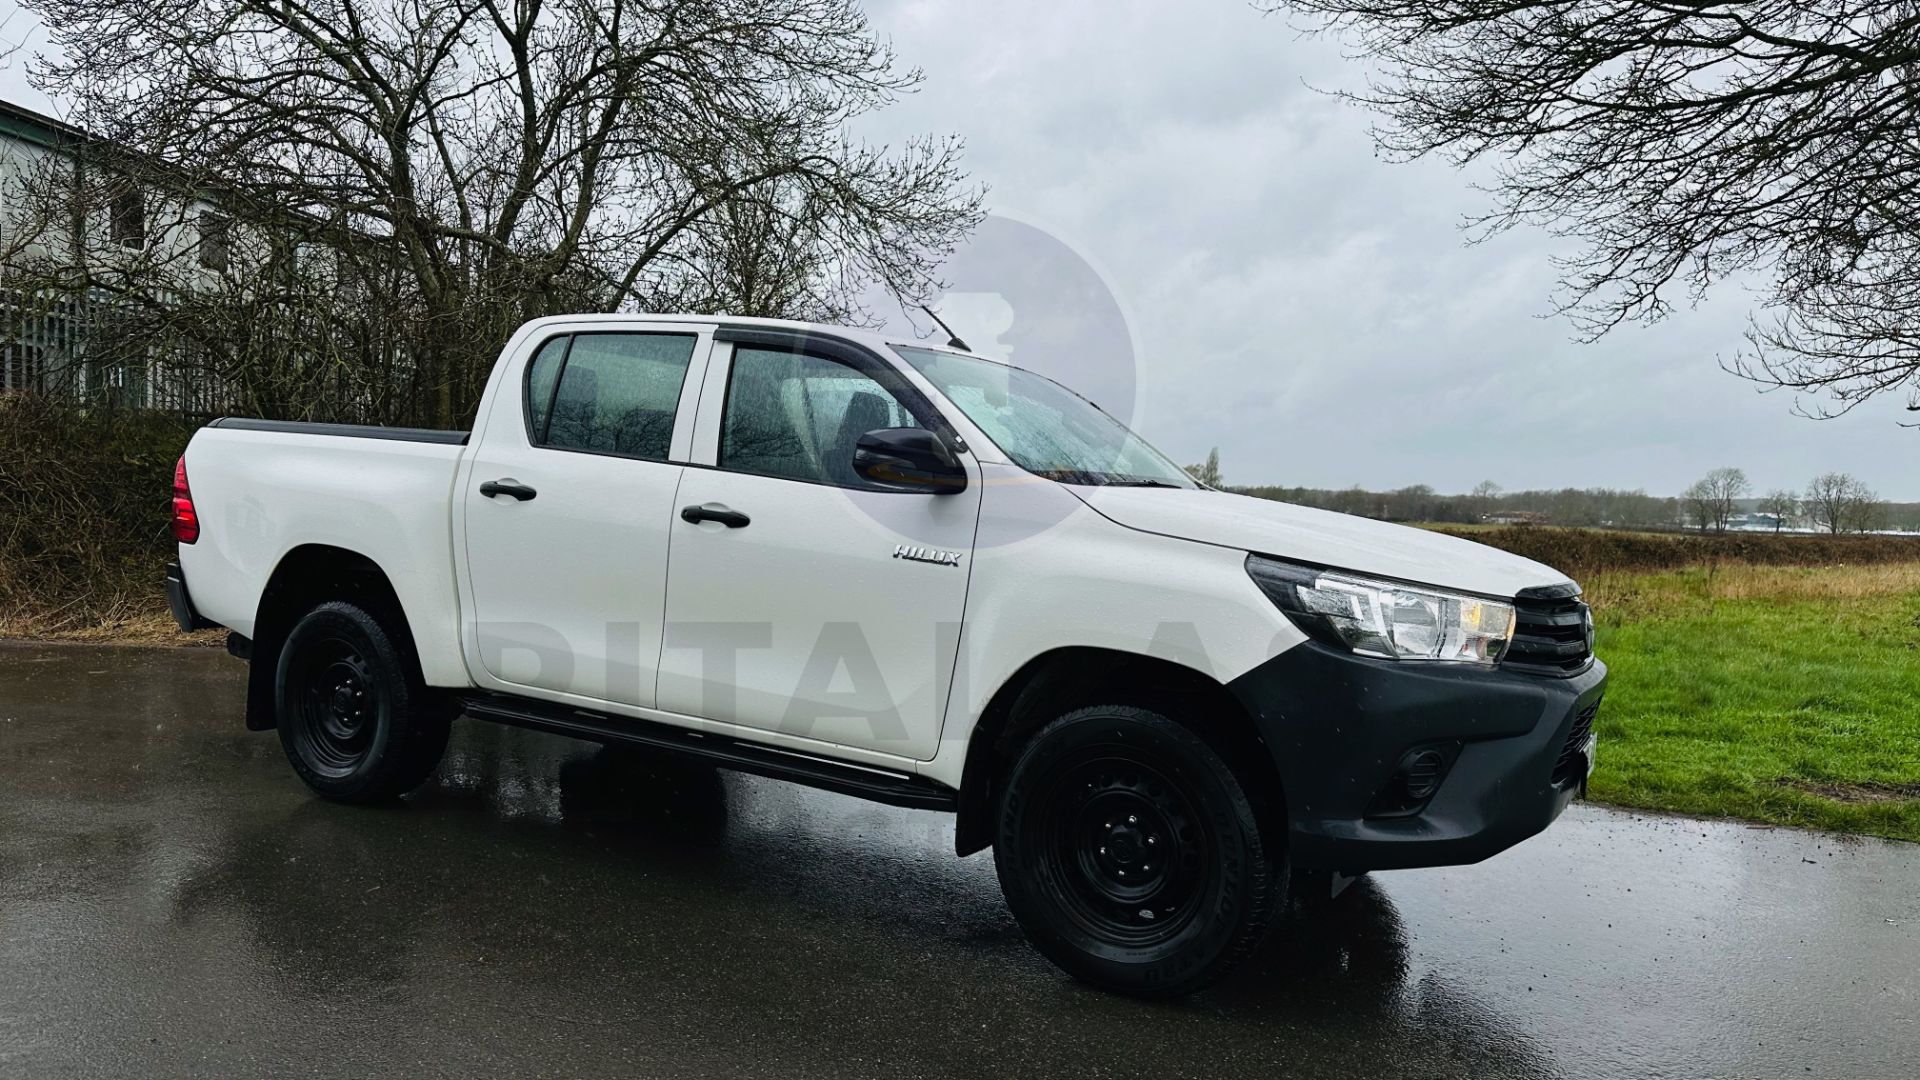 TOYOTA HILUX *DOUBLE CAB PICK-UP* (2020 - EURO 6) 2.4 D-4D - AUTO STOP/START *AIR CON* (1 OWNER) - Image 6 of 48